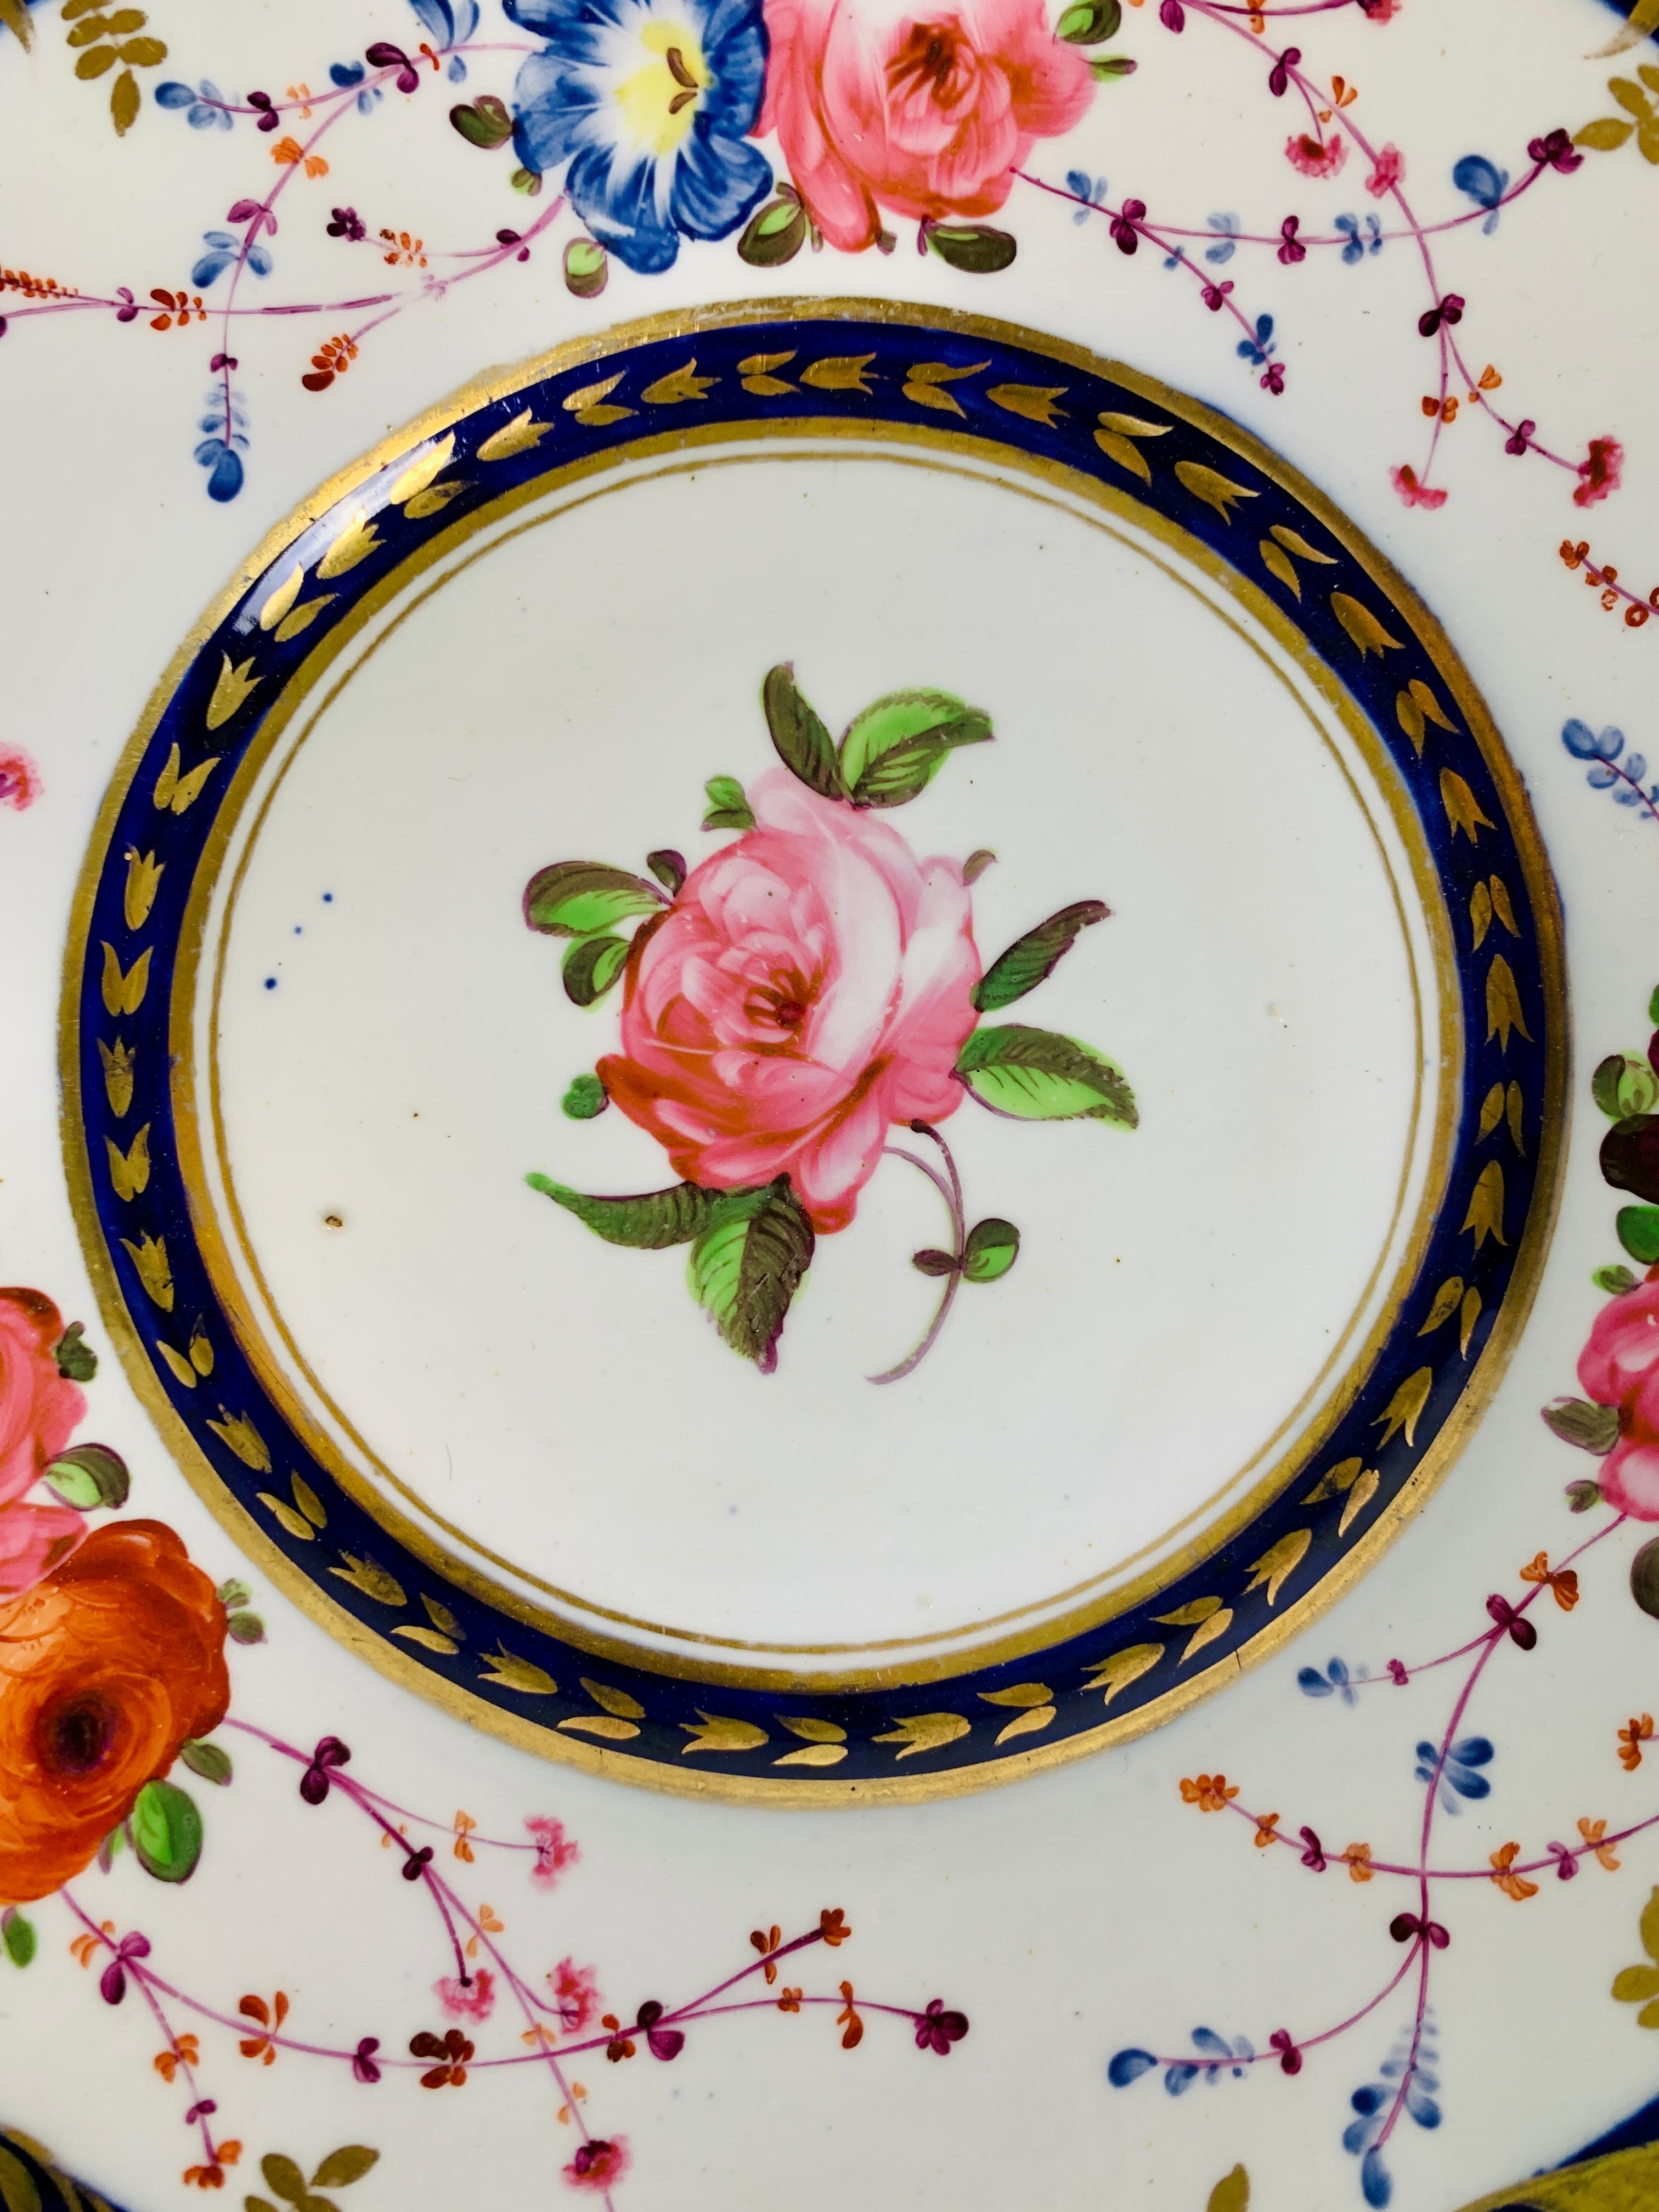 Regency Antique English Porcelain Dish Made in England Circa 1820 Decorated with Roses For Sale